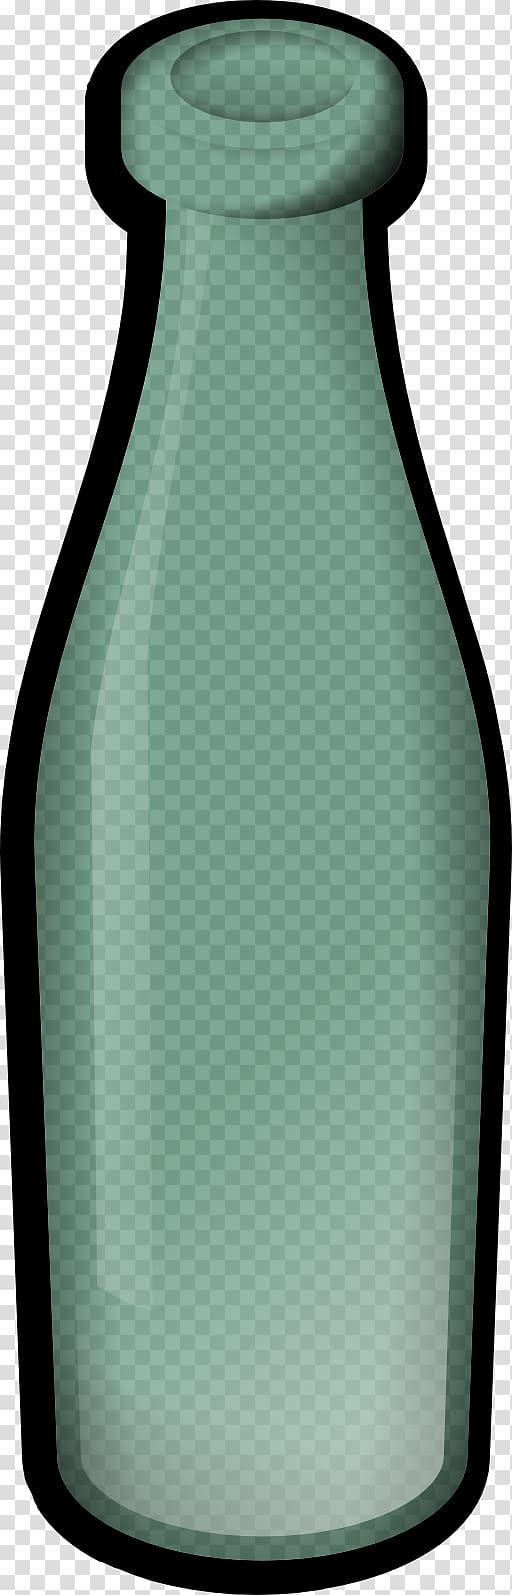 Glass bottle Computer Icons , glass bottle transparent background PNG clipart